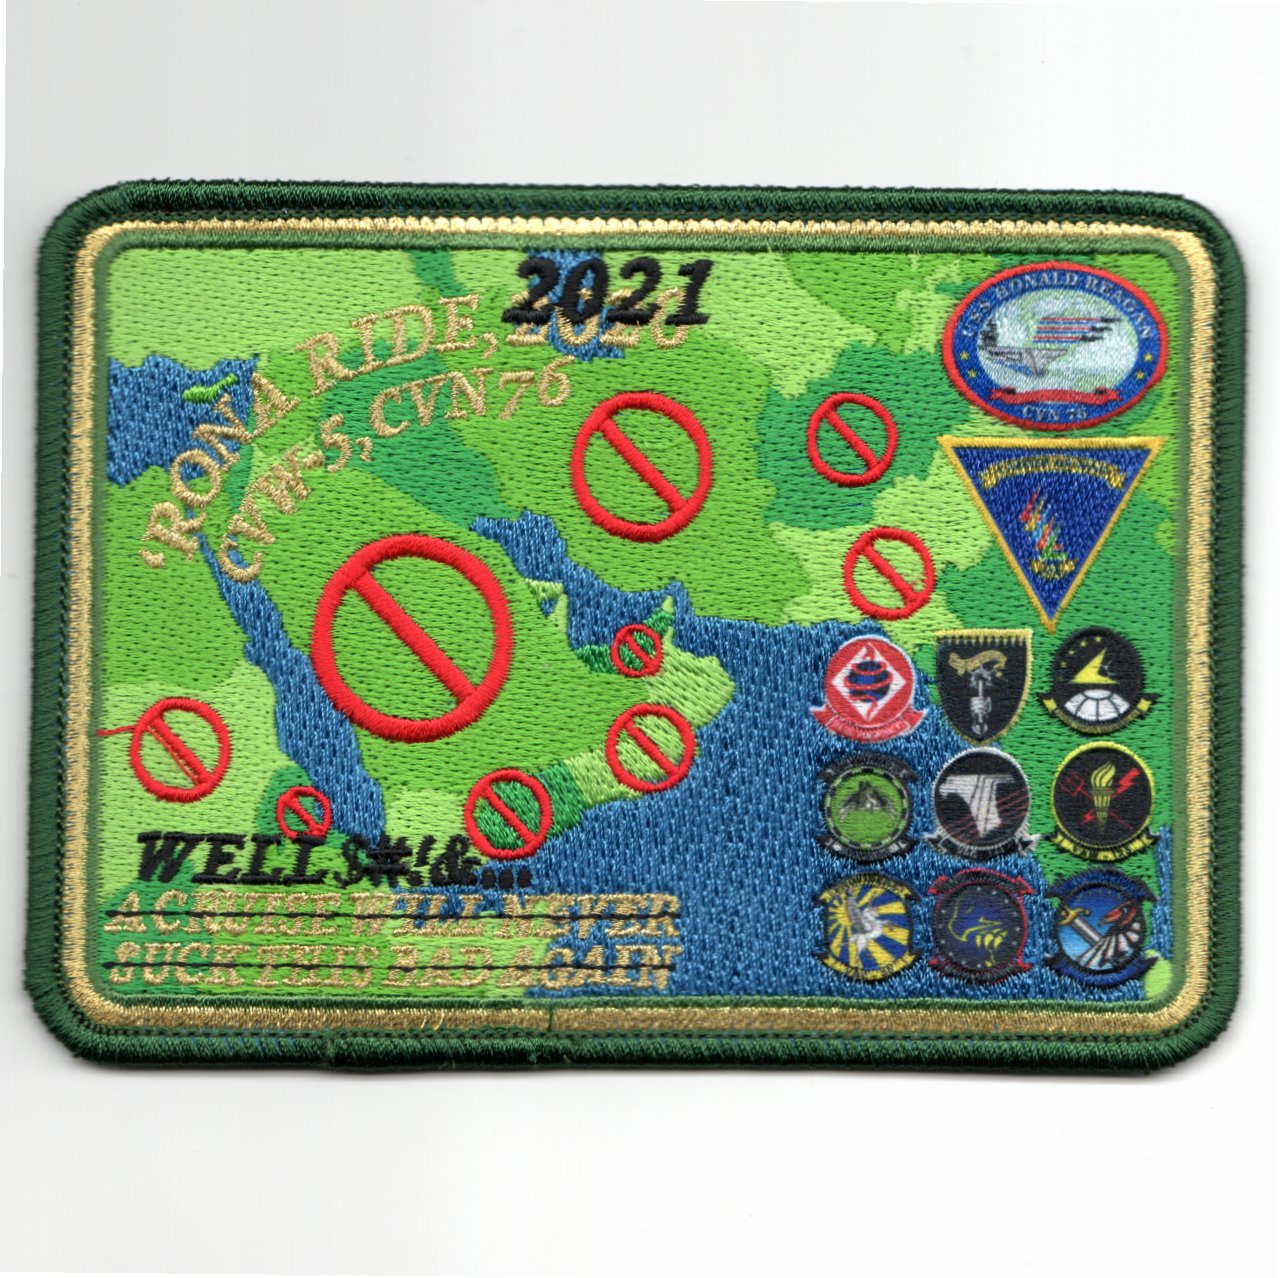 VAQ-141 2021 'WELL SHIT' Cruise Patch (Green/Rect)